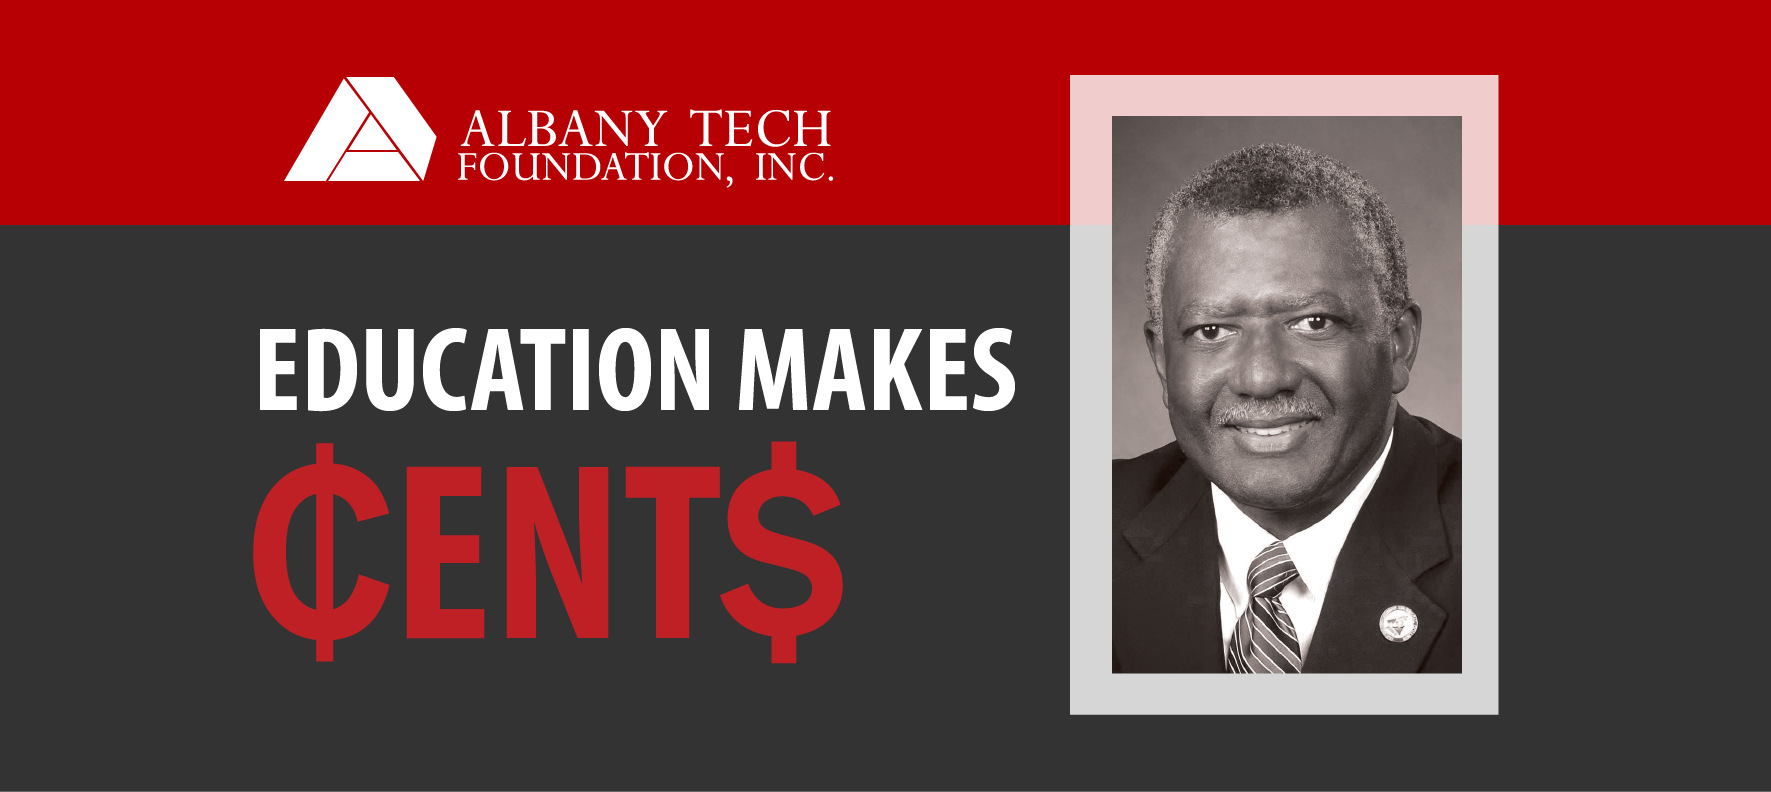 Albany Tech Foundation Inc. Education Makes Cents and Photo of Dr. Anthony Parker.